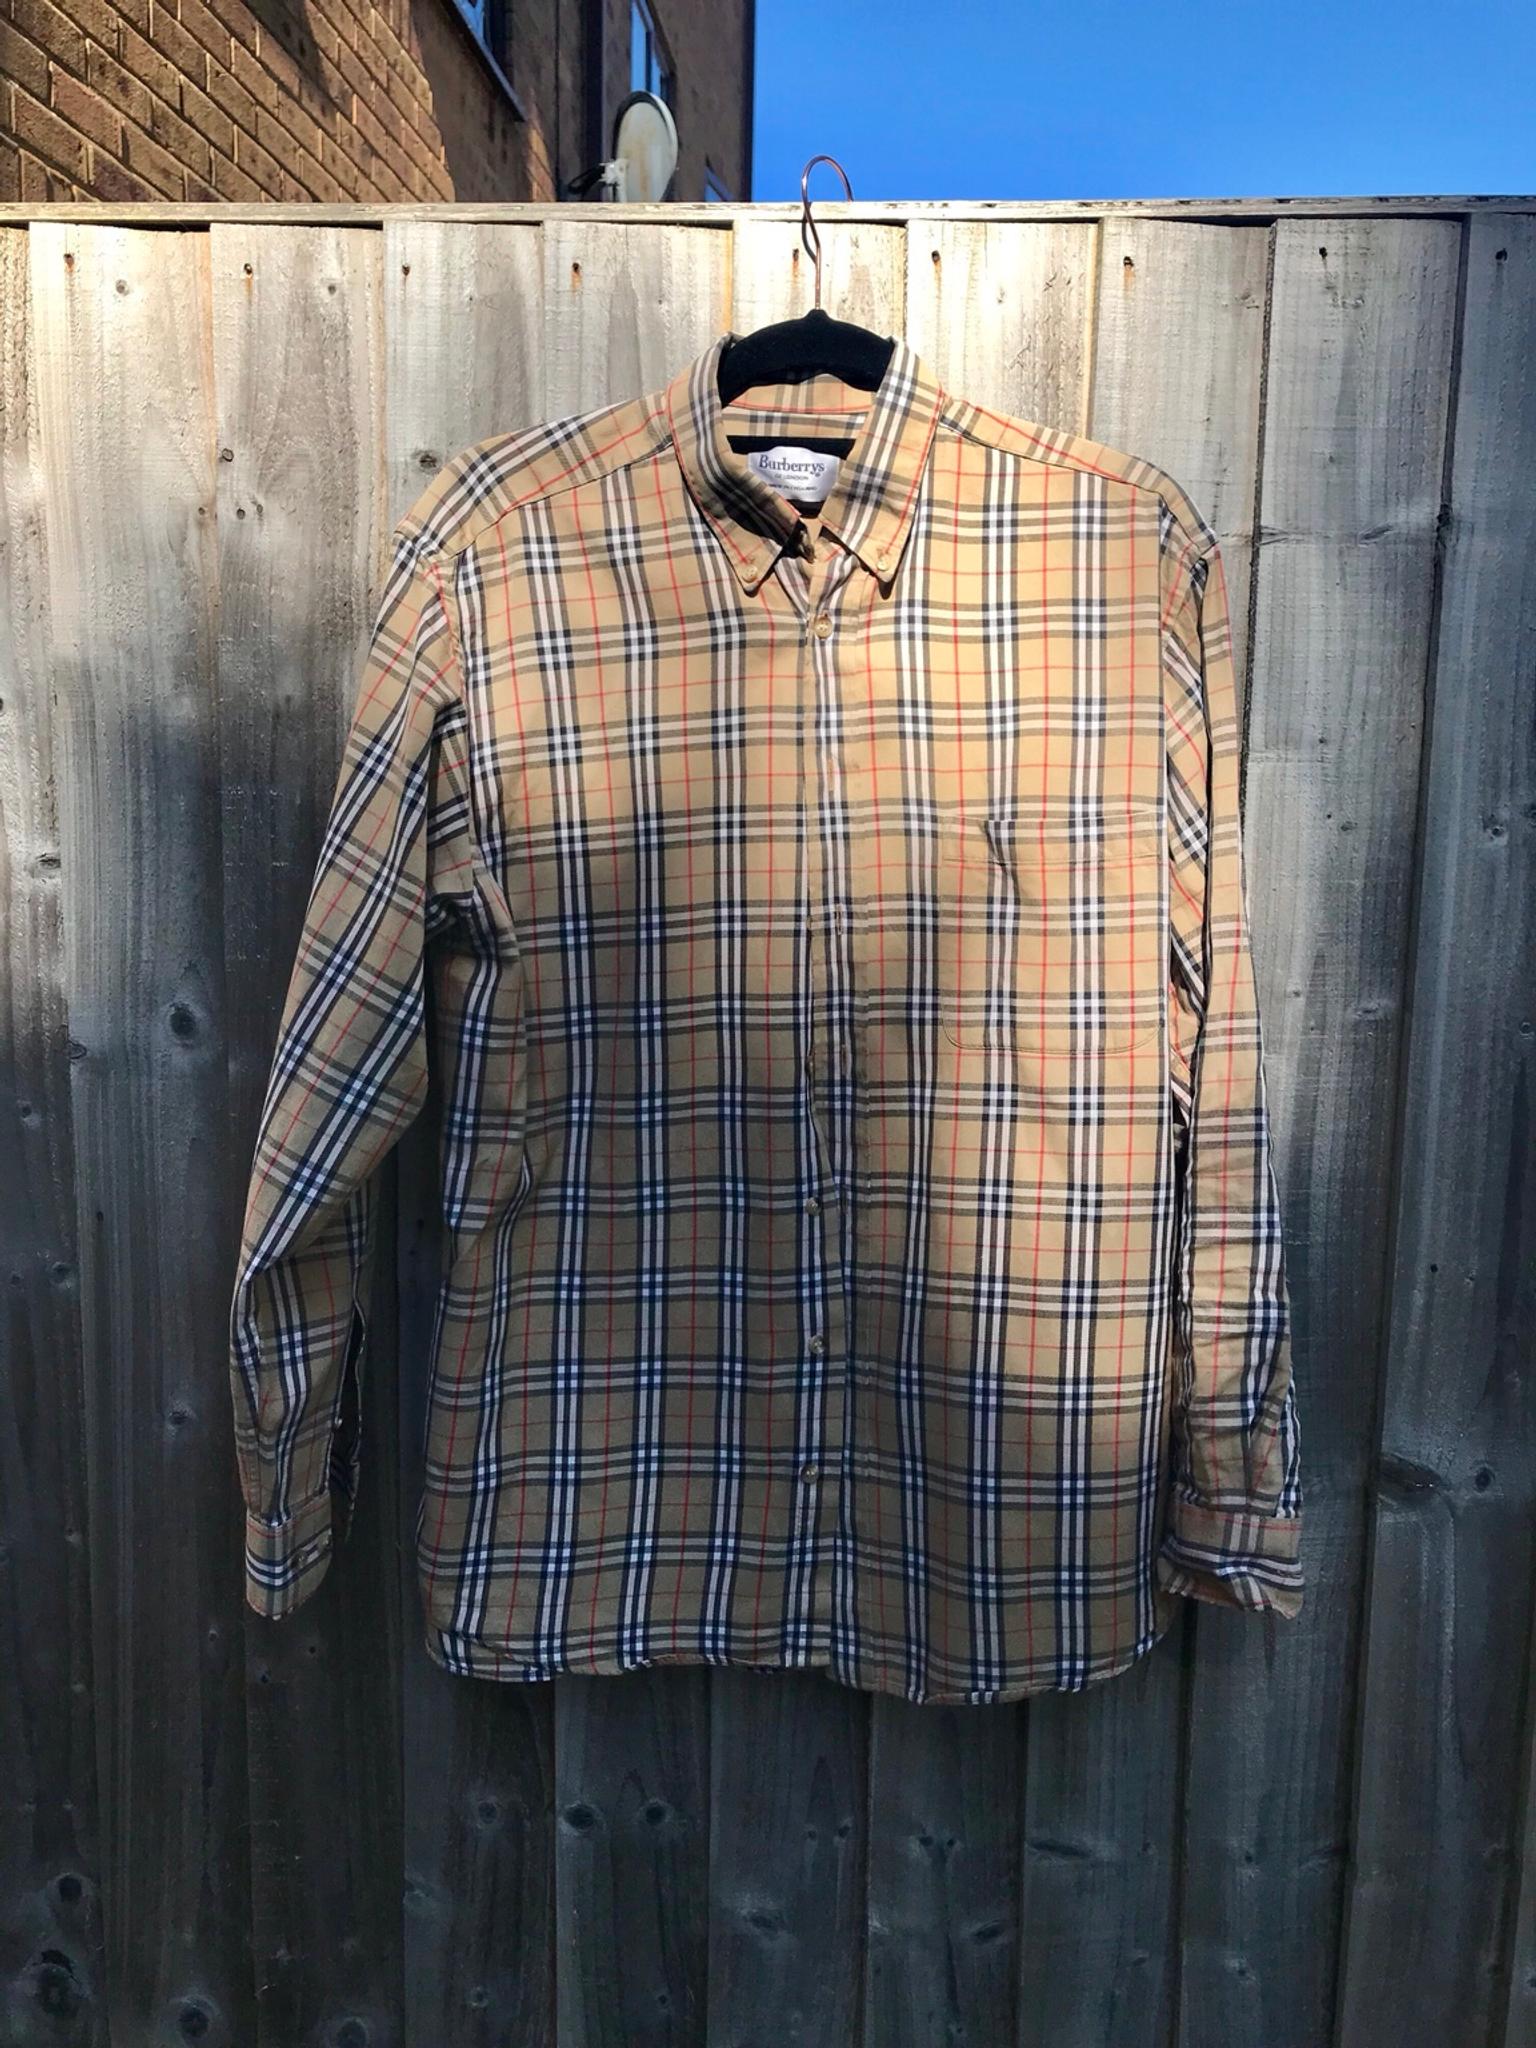 burberry pattern clothes